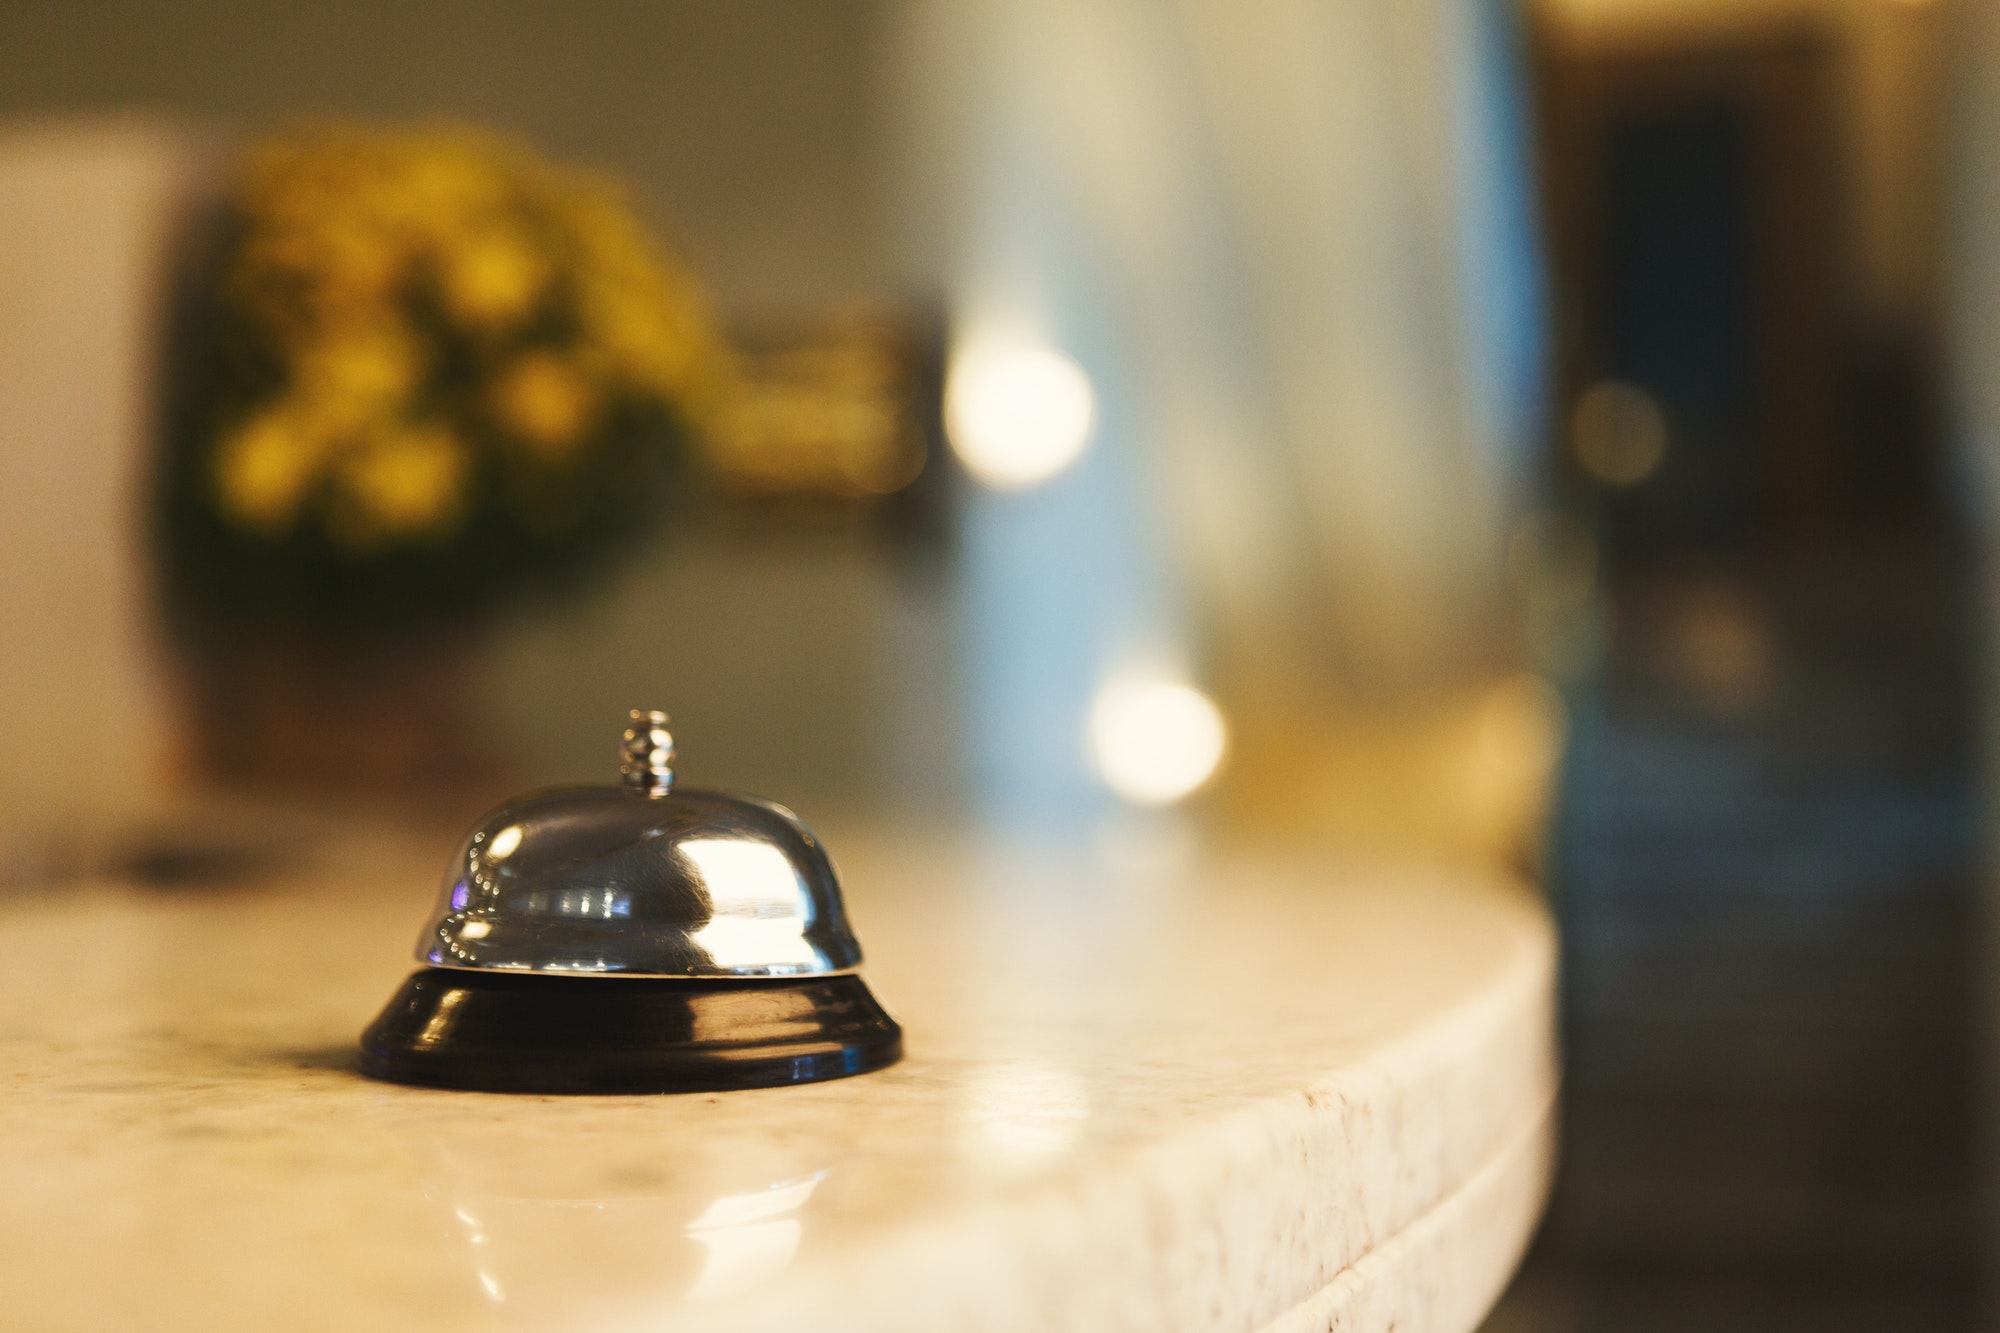 Hotel accommodation call bell on reception desk